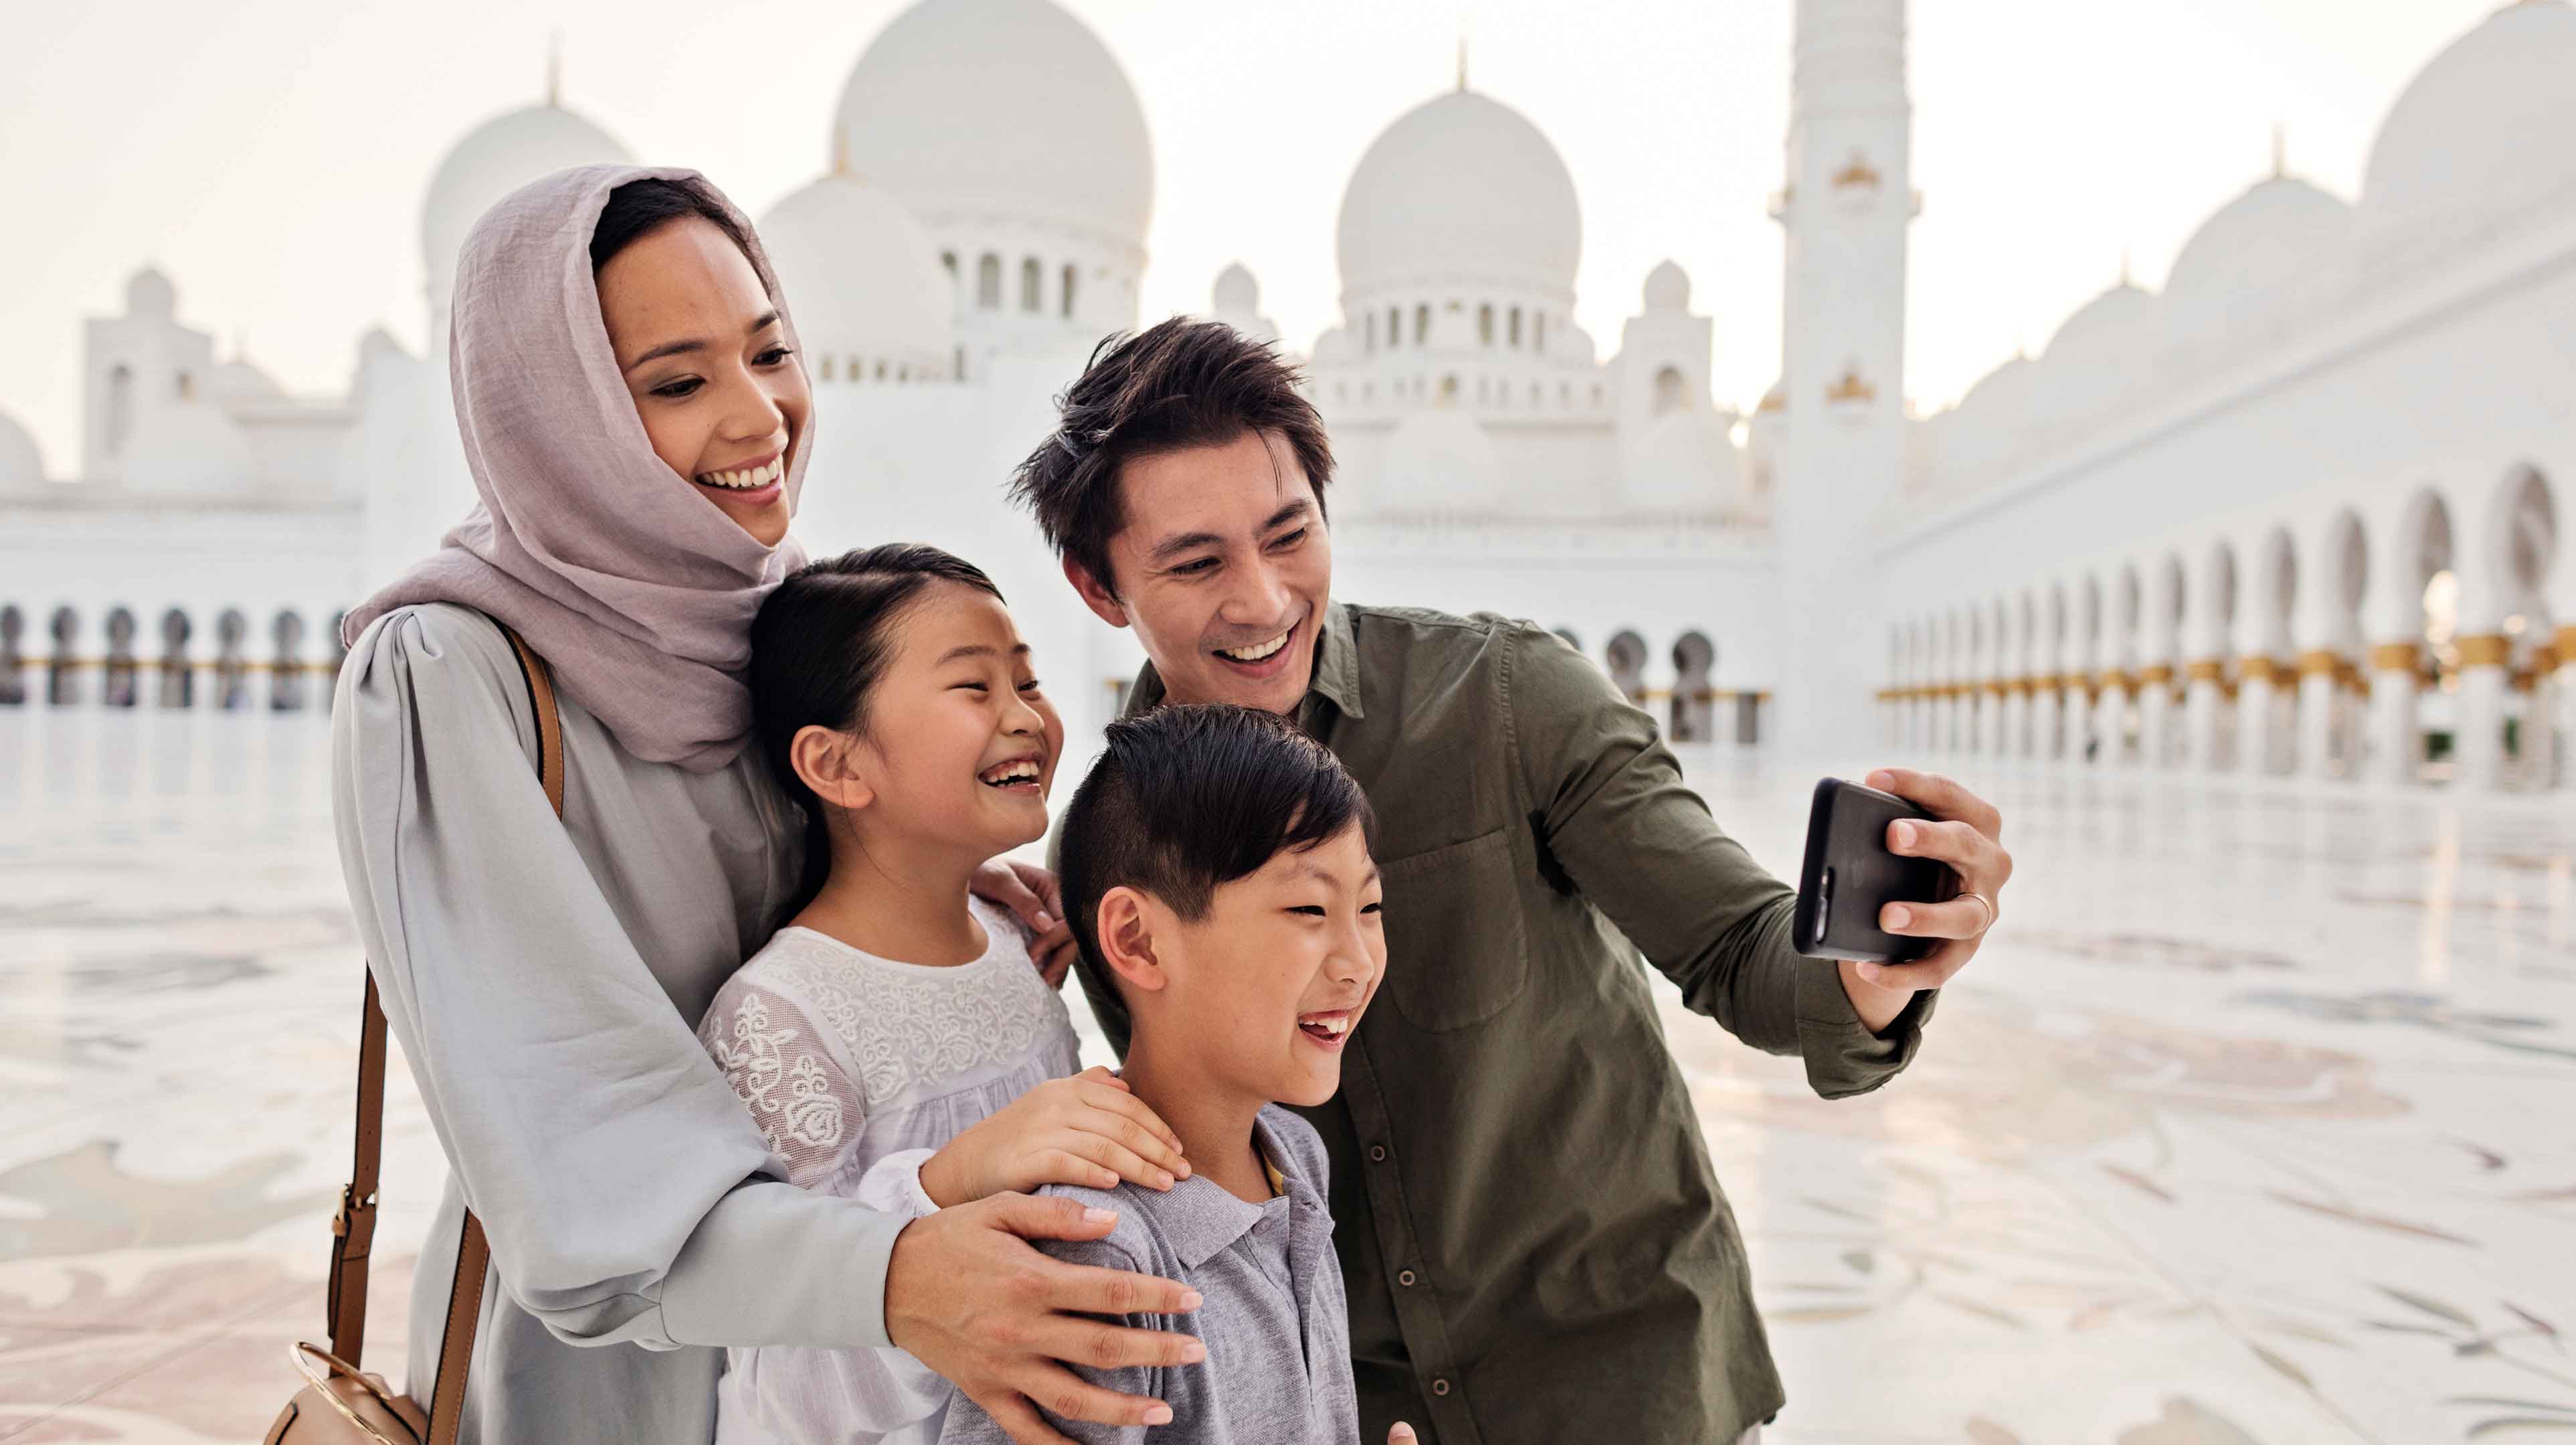 Asian family smiling and taking pictures in Sheikh Zayed Grand Mosque's inner courtyard